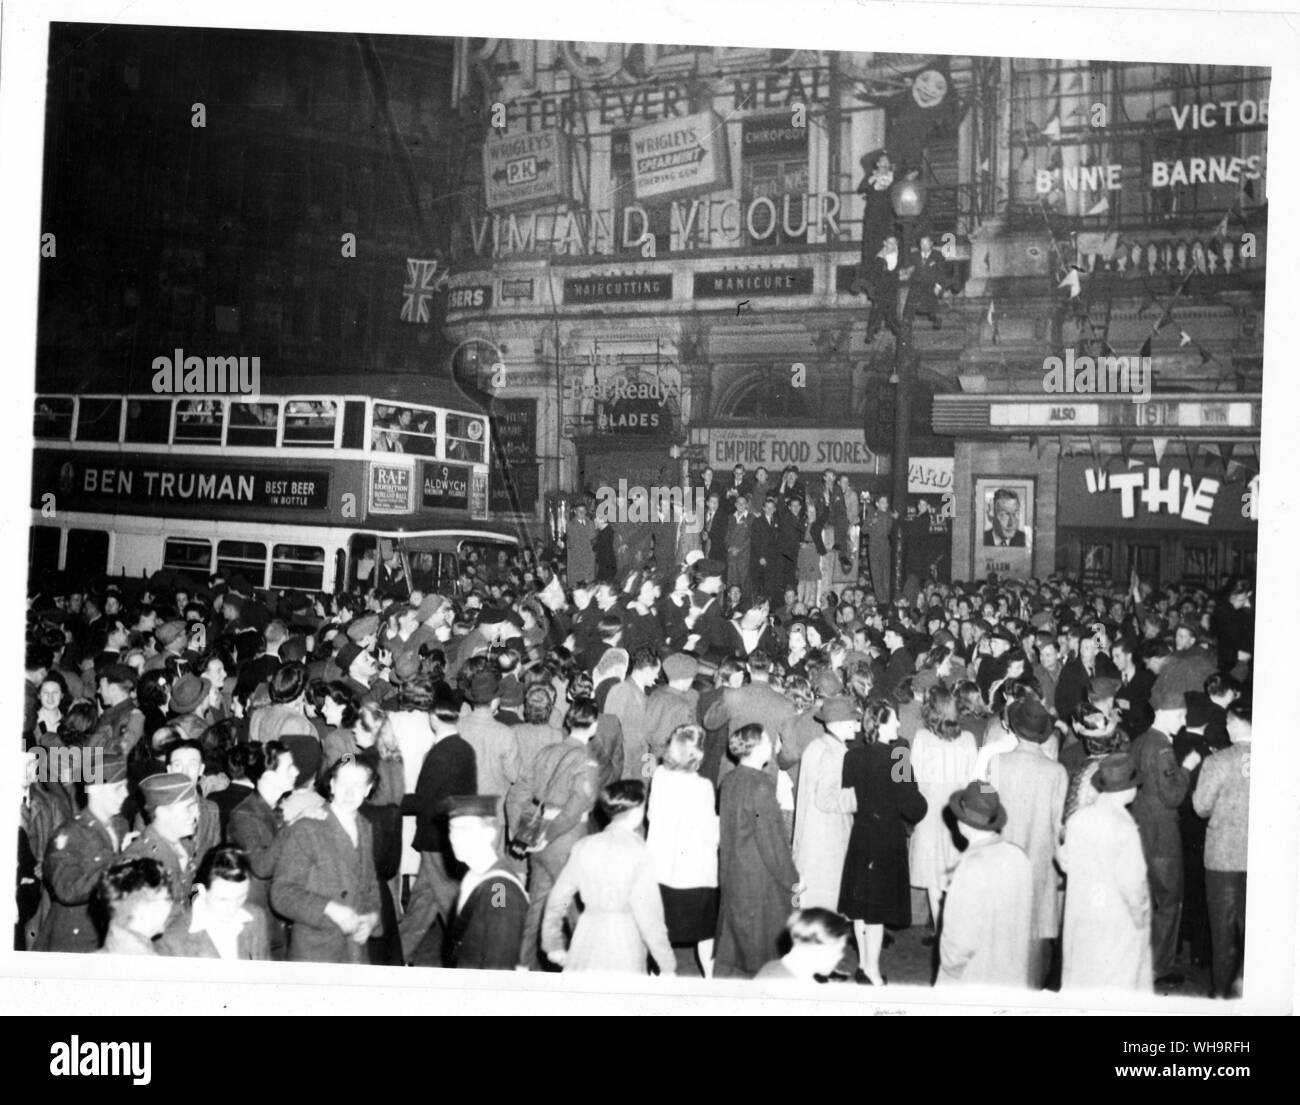 7th Mqy 1945: A scene in Piccadilly Circus when Londoners went crazy with joy at the news of Germany's capitulation at surrendering in World War II. Stock Photo